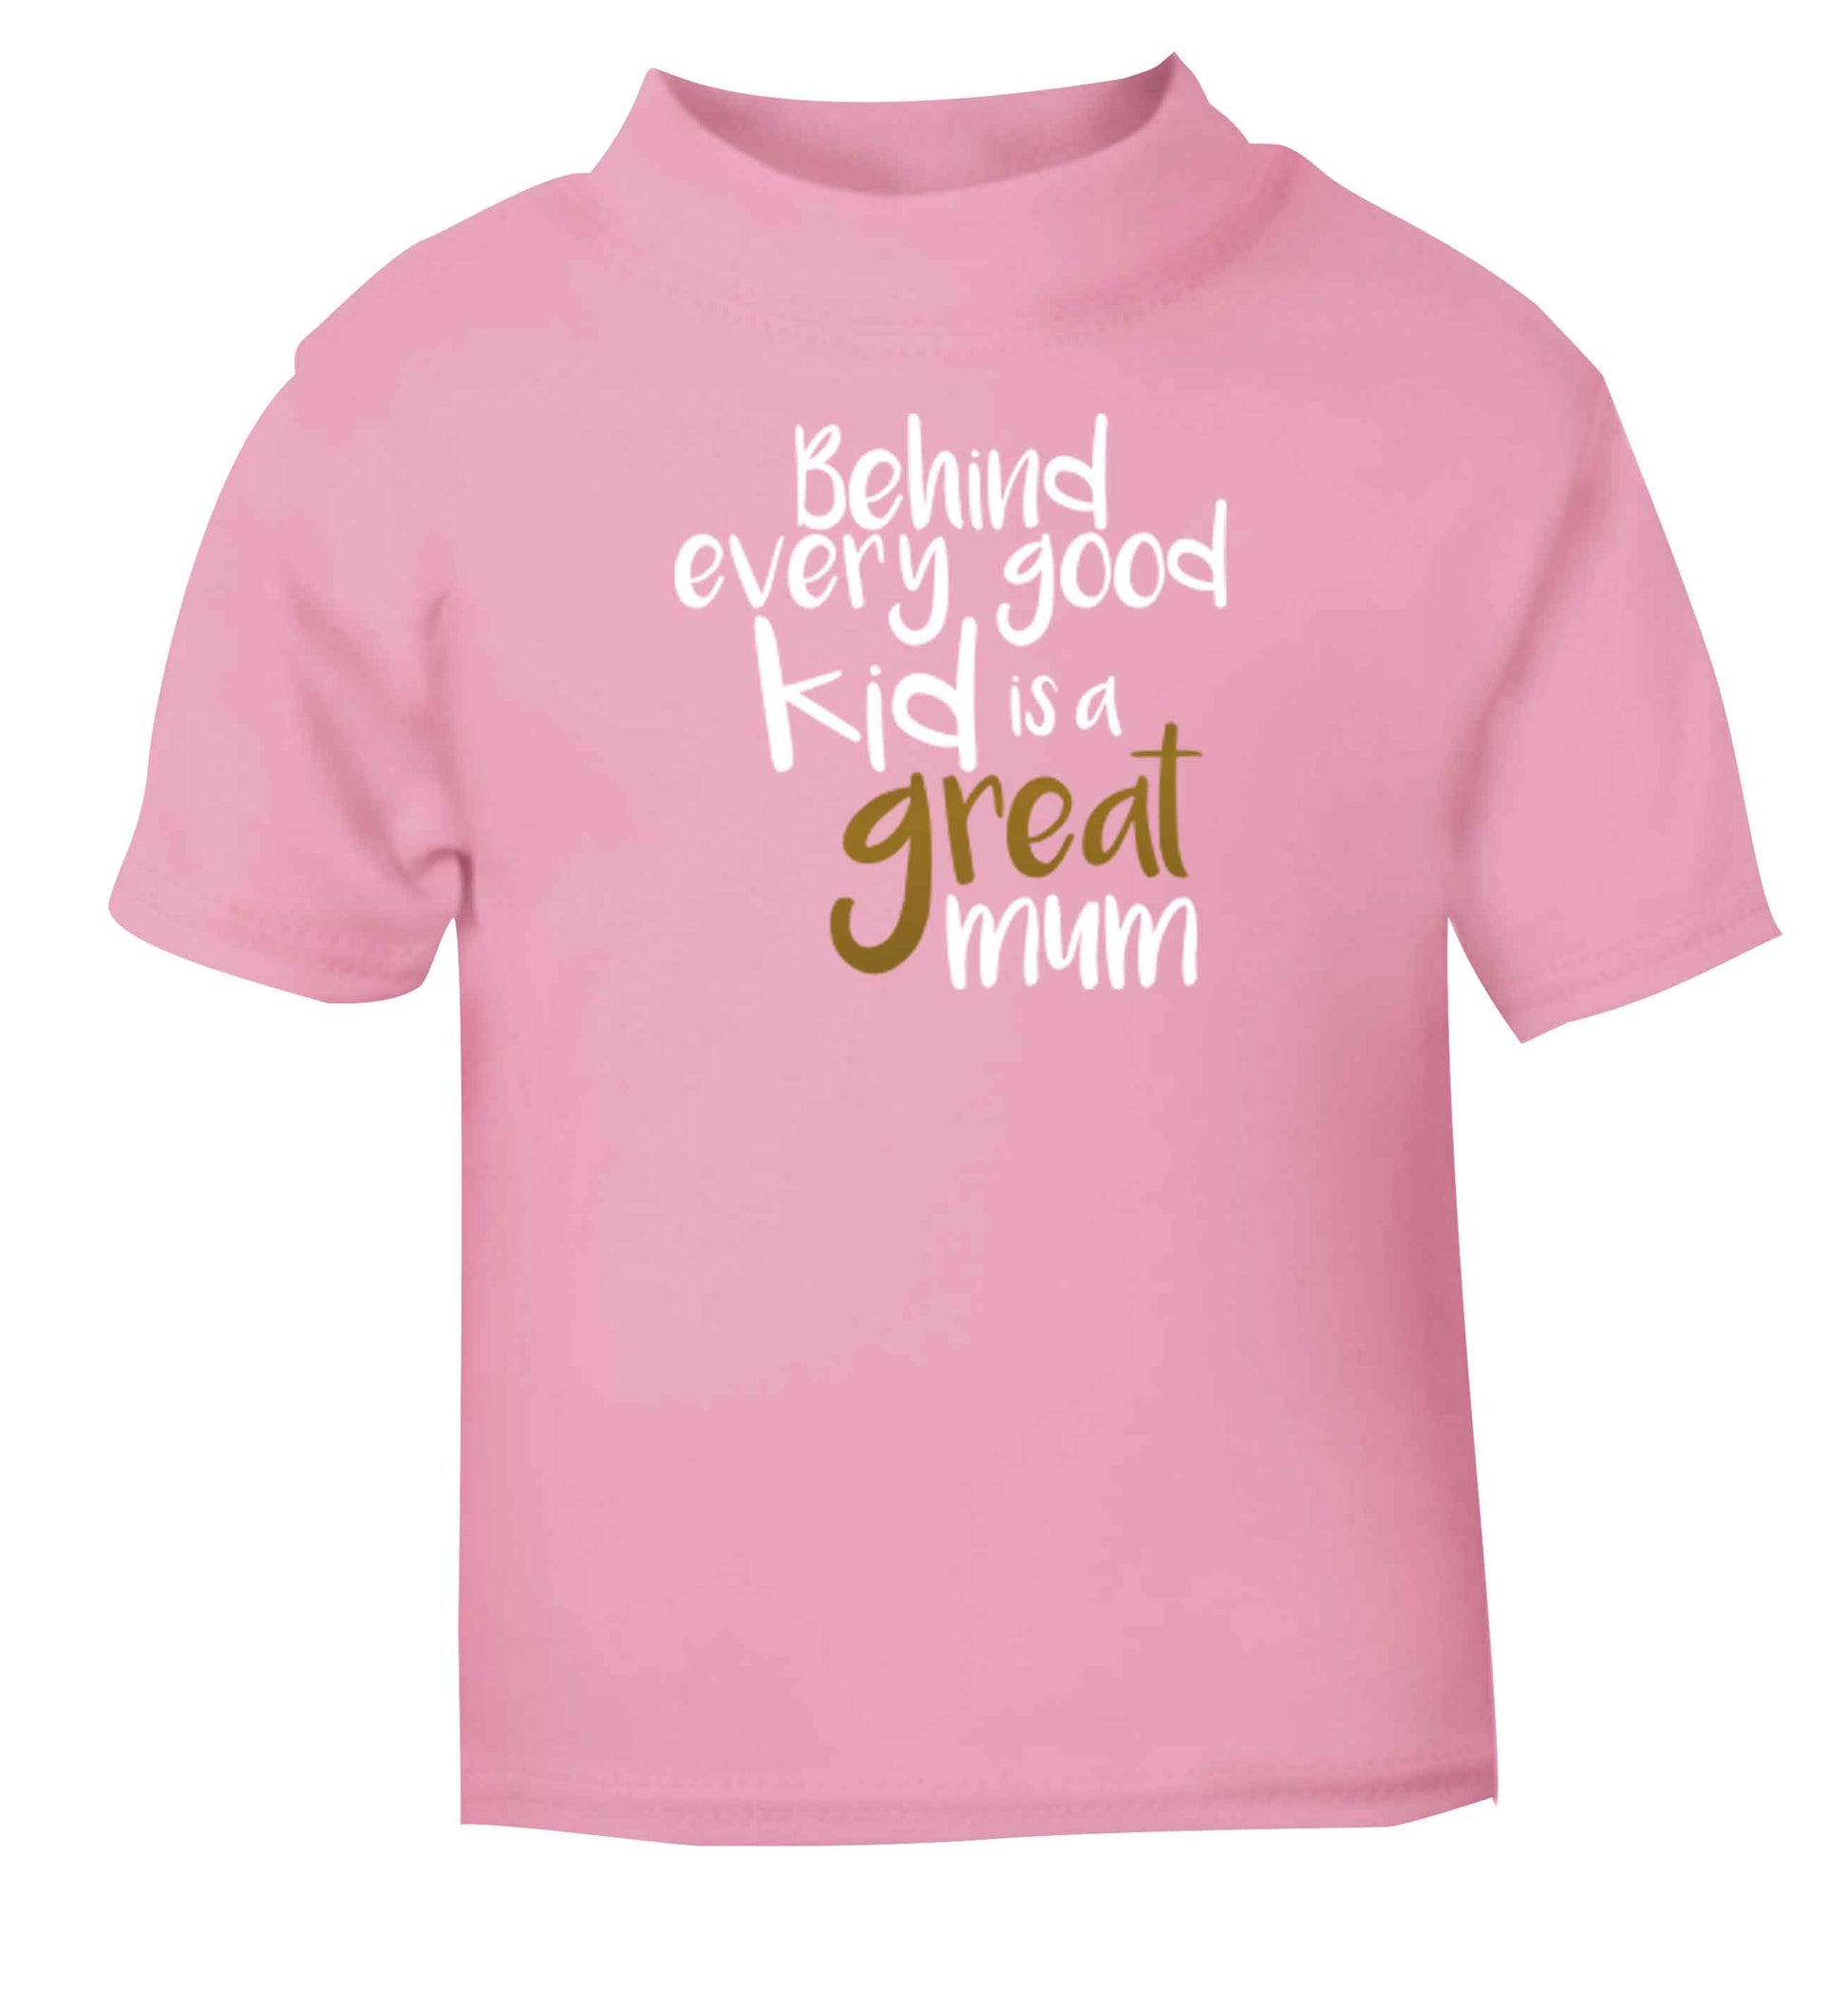 Behind every good kid is a great mum light pink baby toddler Tshirt 2 Years